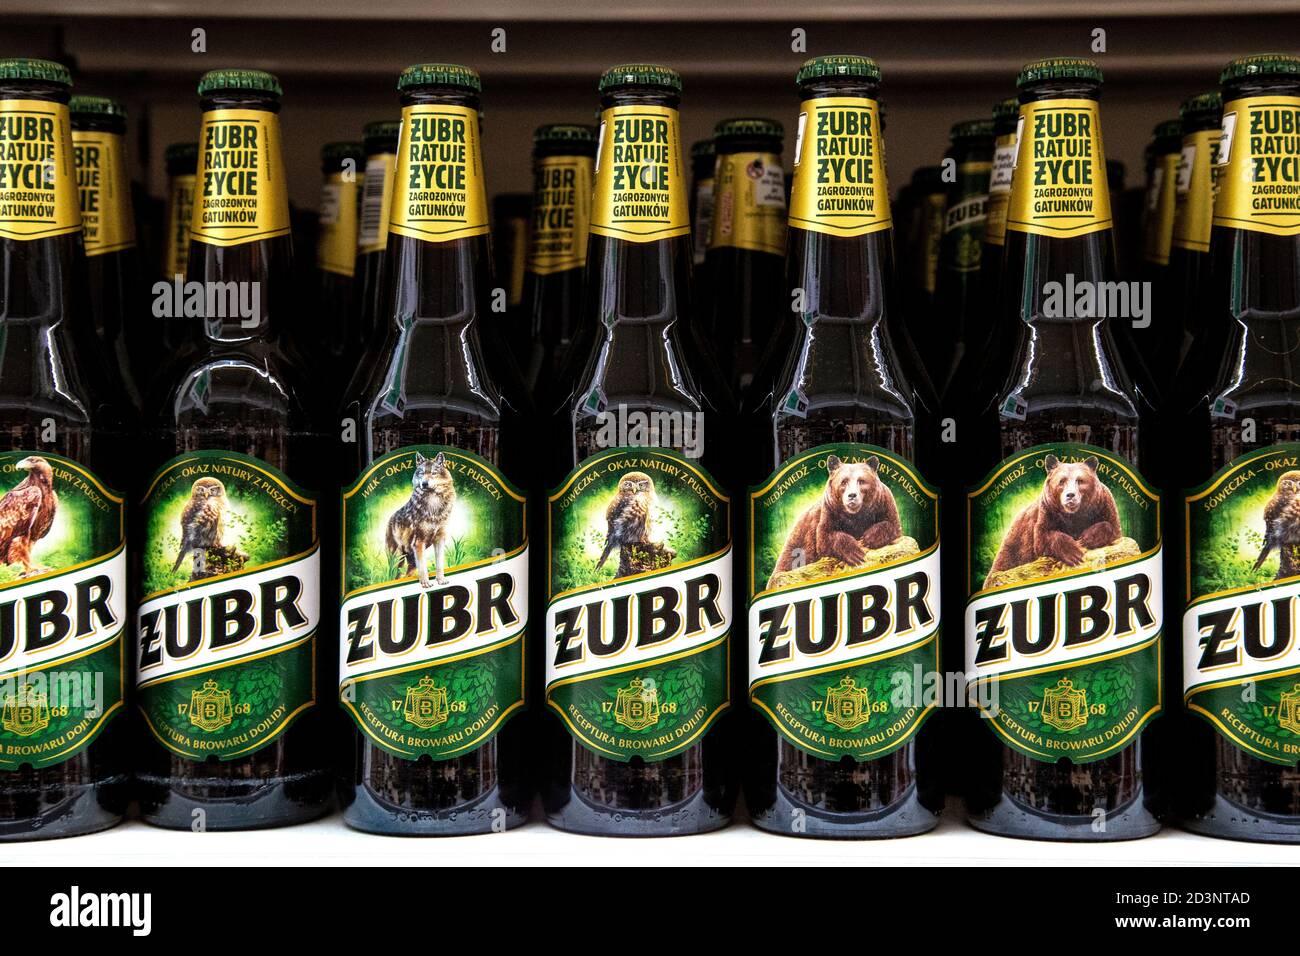 Polish beer Zubr on the shelf of a supermarket Stock Photo